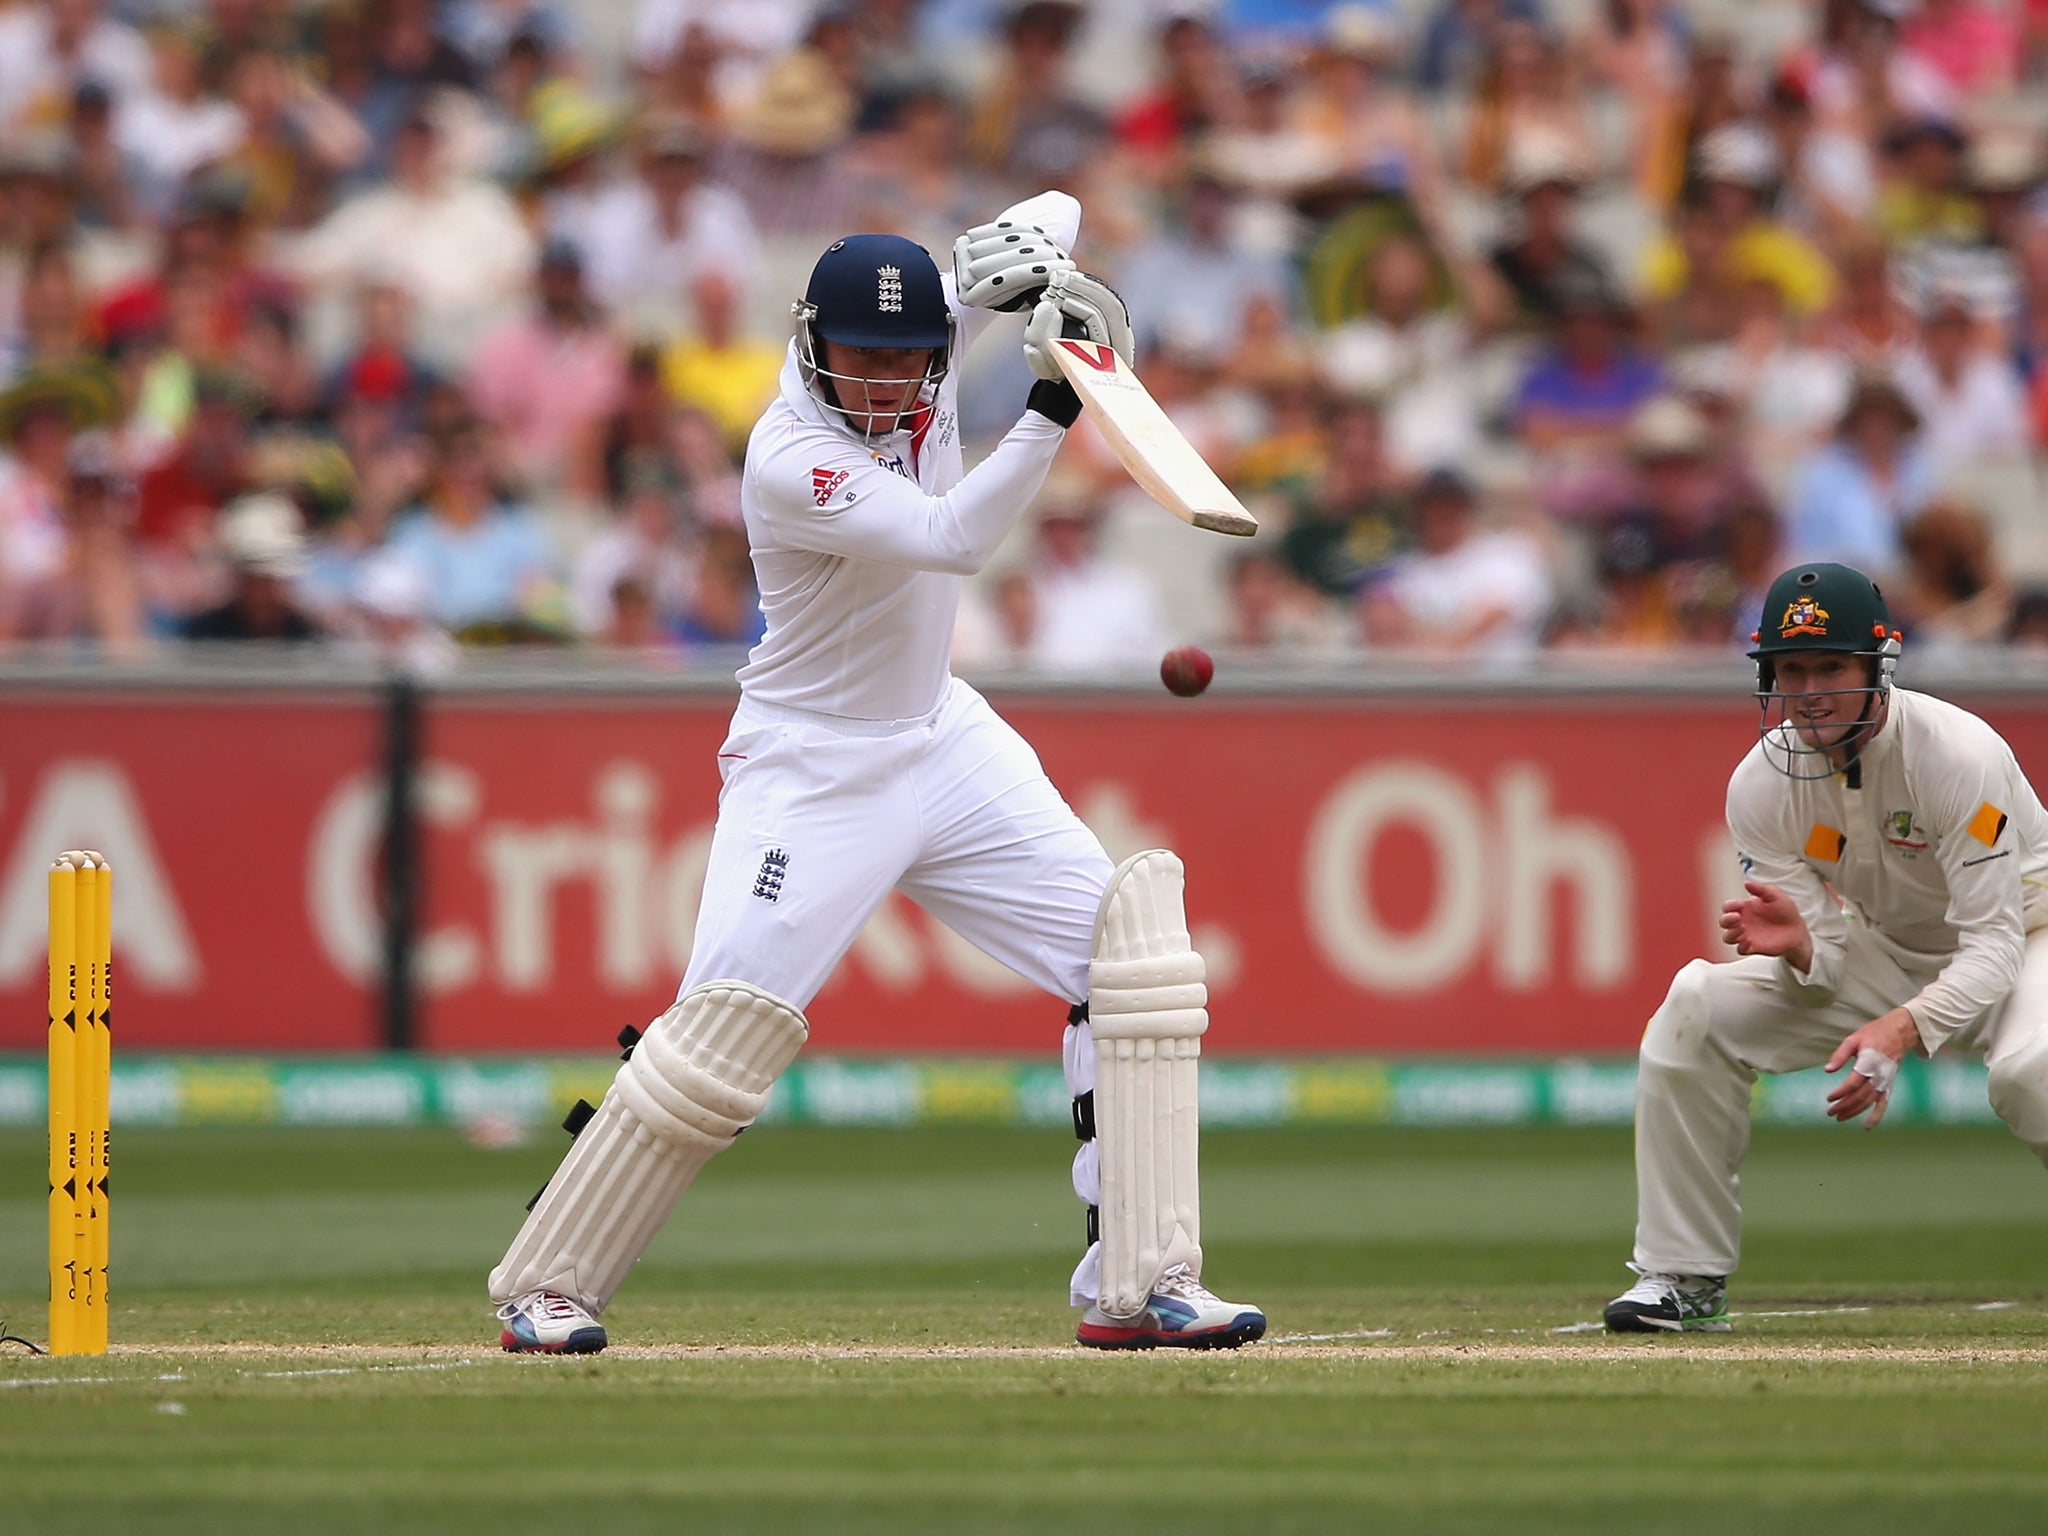 England wicketkeeper Jonny Bairstow could not explain why England had suffered yet another batting collapse in the Fourth Test